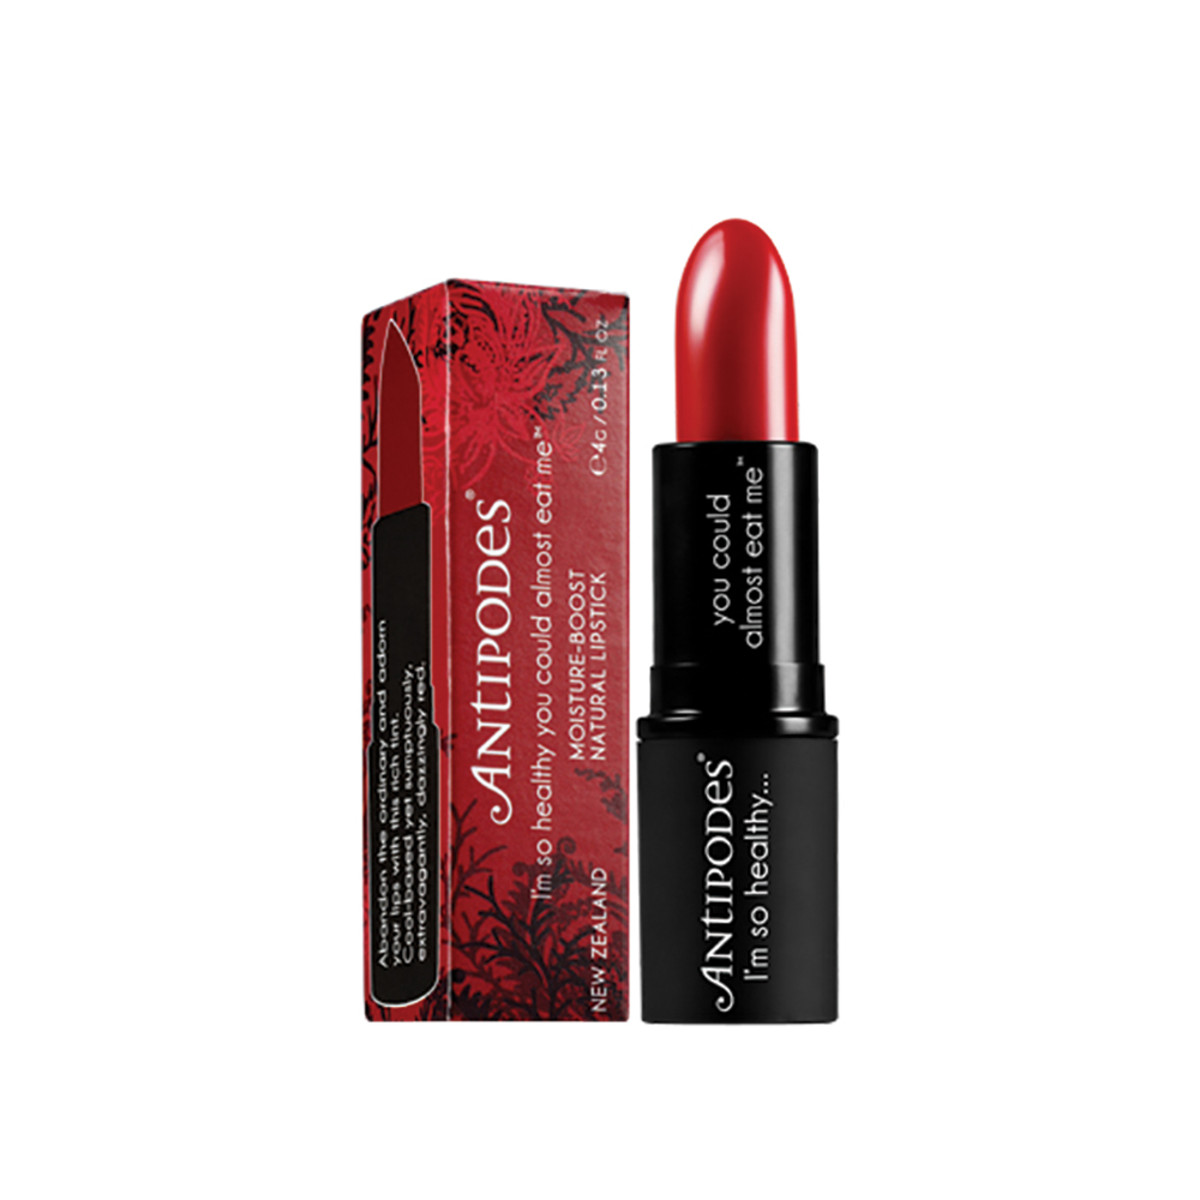 Antipodes Lipstick Ruby Bay Rouge 4g_media-01